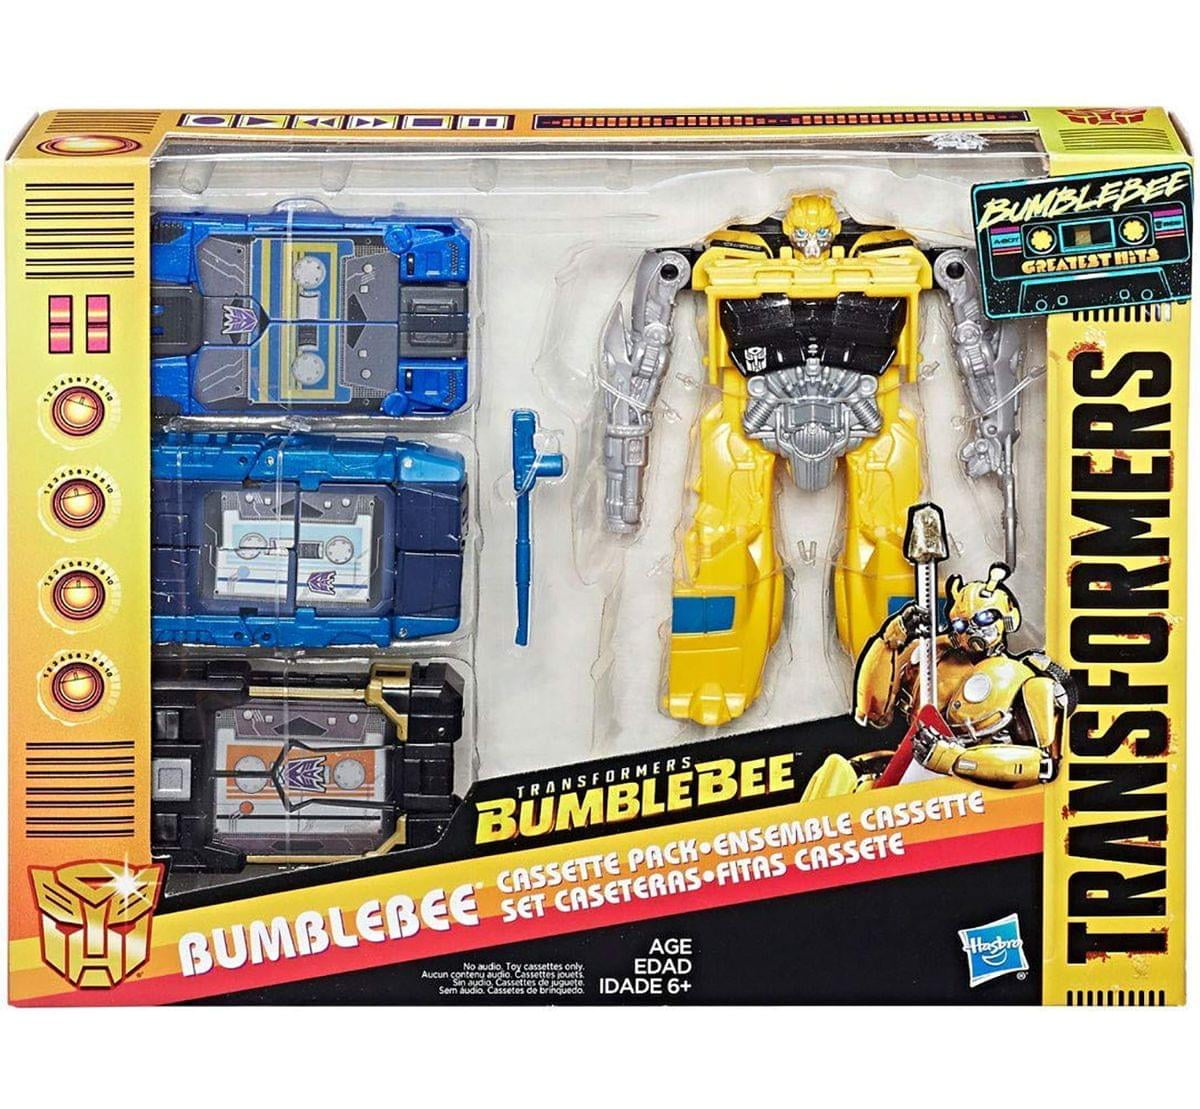 Transformers Bumblebee Greatest Hits Bumblebee Cassette Pack